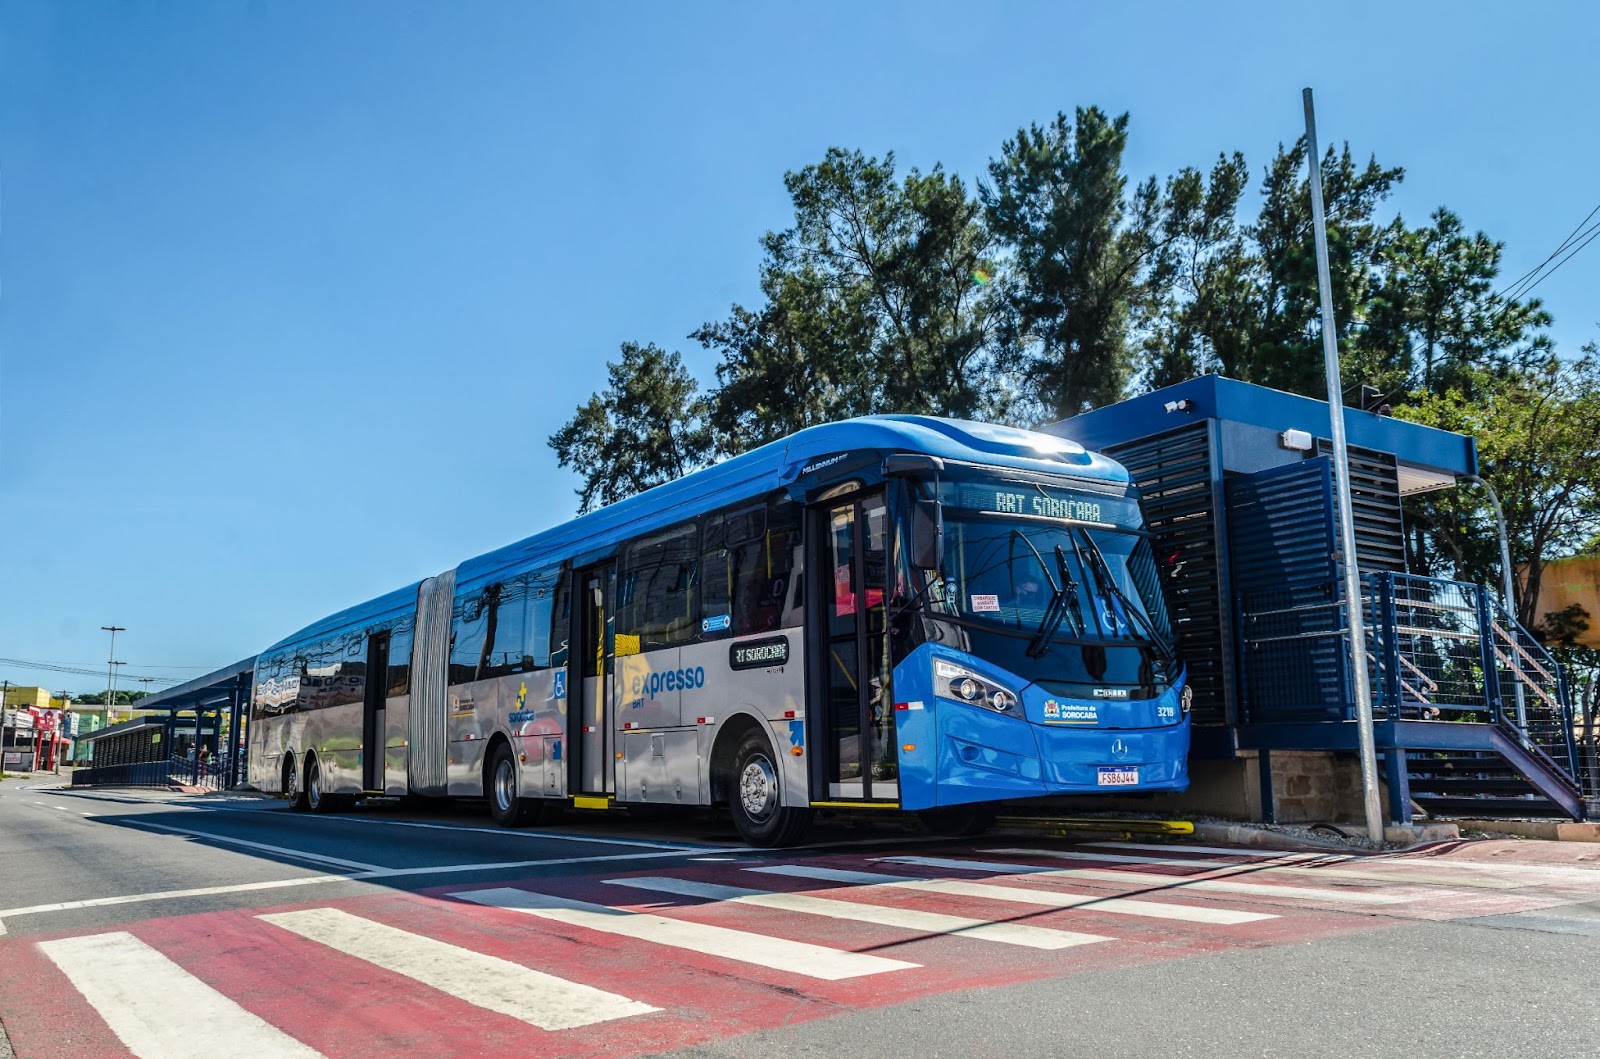 Bringing the latest innovations in transportation planning technology to BRT Sorocaba will improve services for 1.6 million monthly passengers.